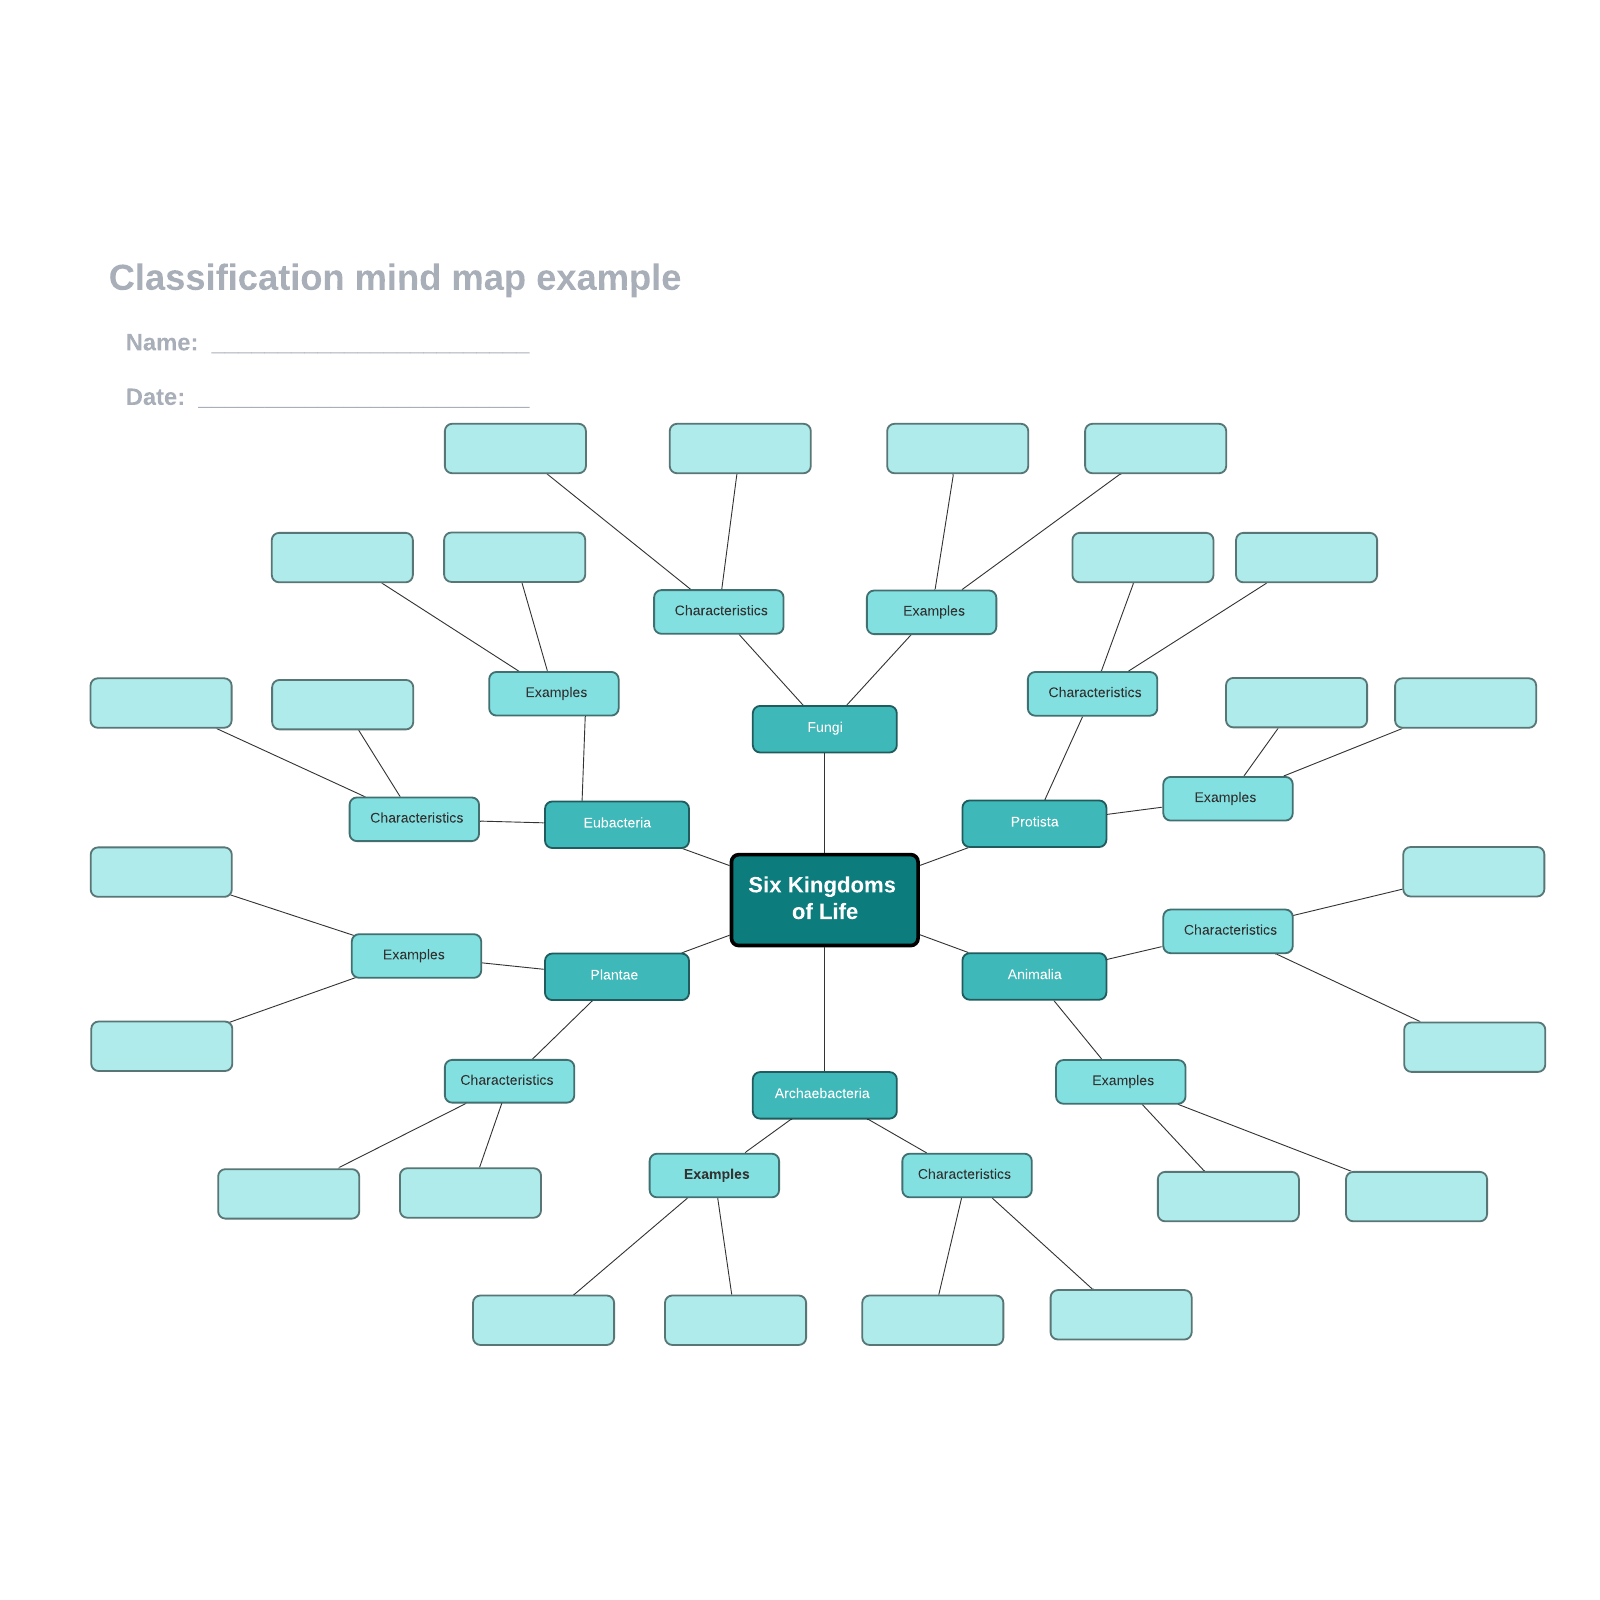 Classification mind map example example